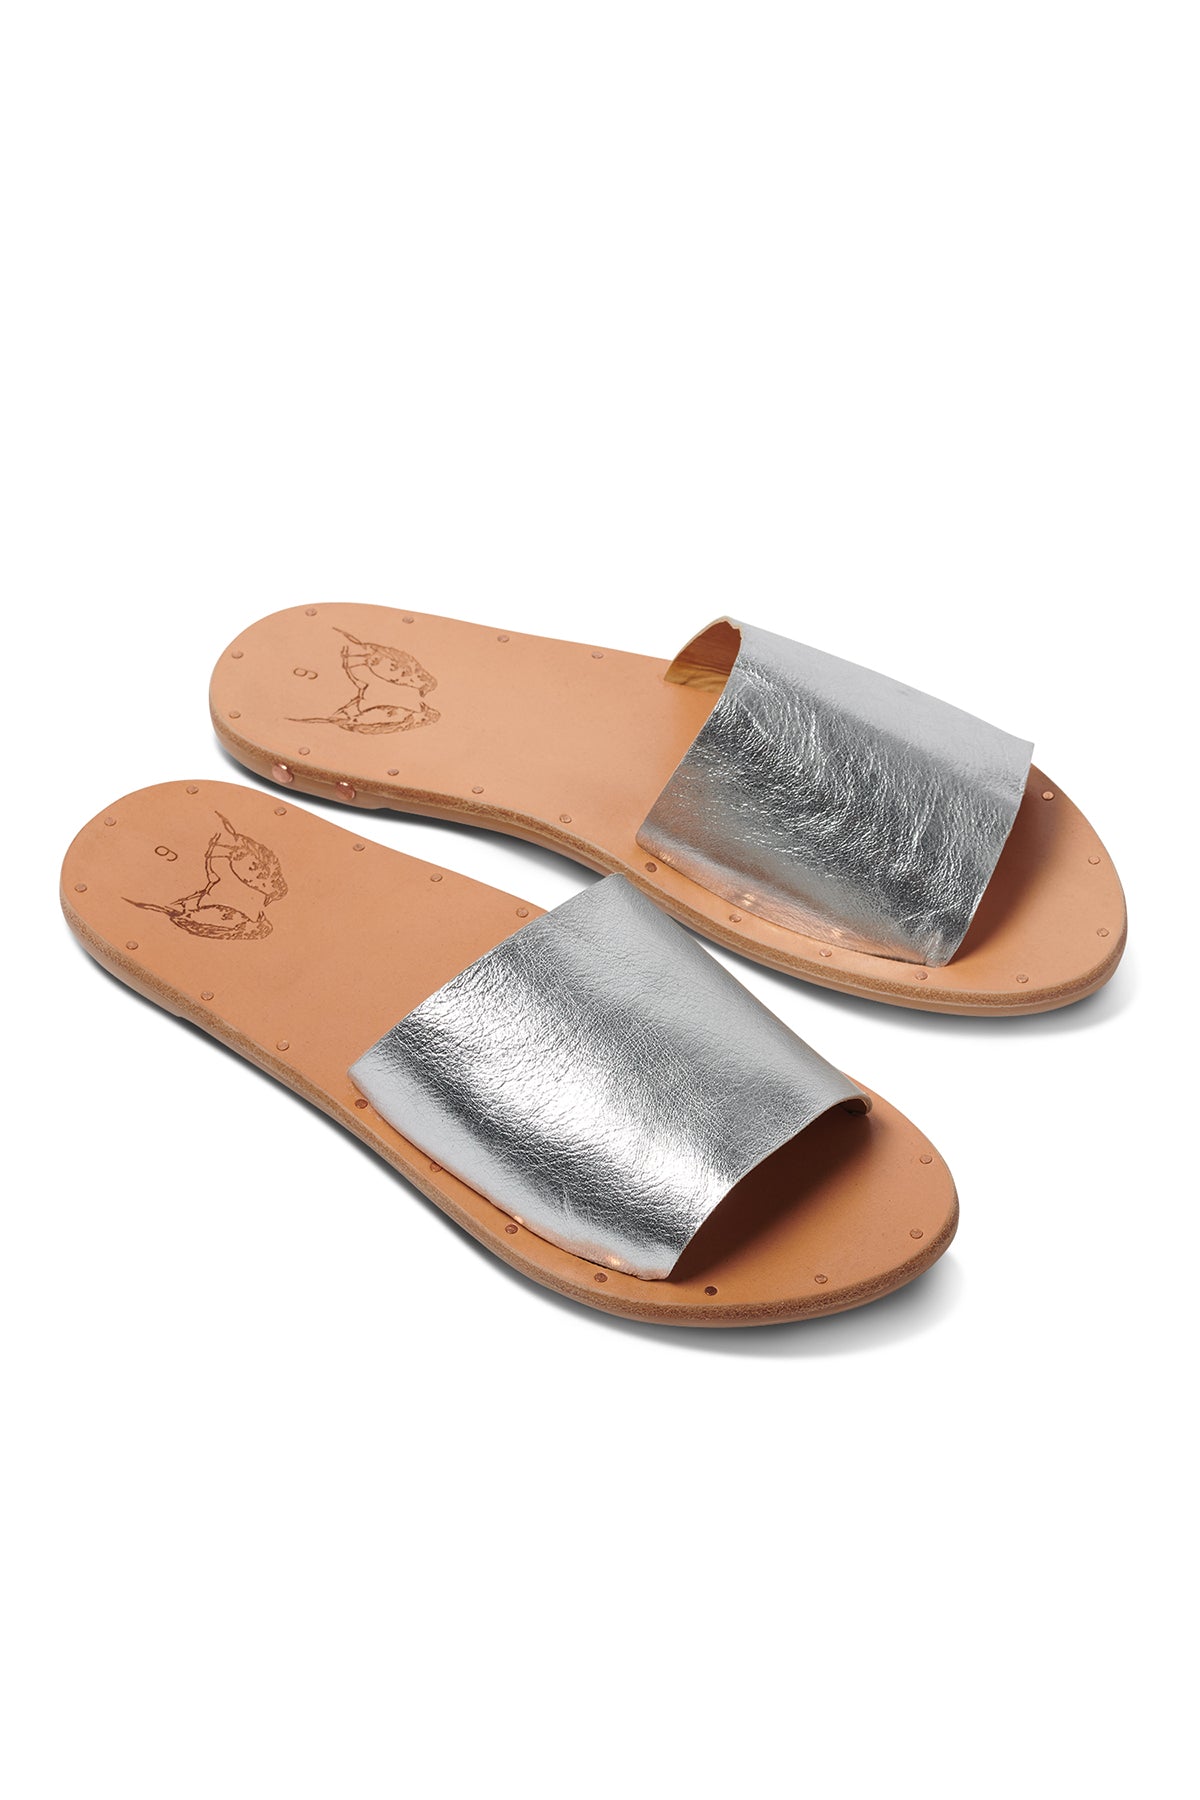 a pair of MOCKINGBIRD SANDAL BY BEEK slide sandals on a white background.-20266124345537